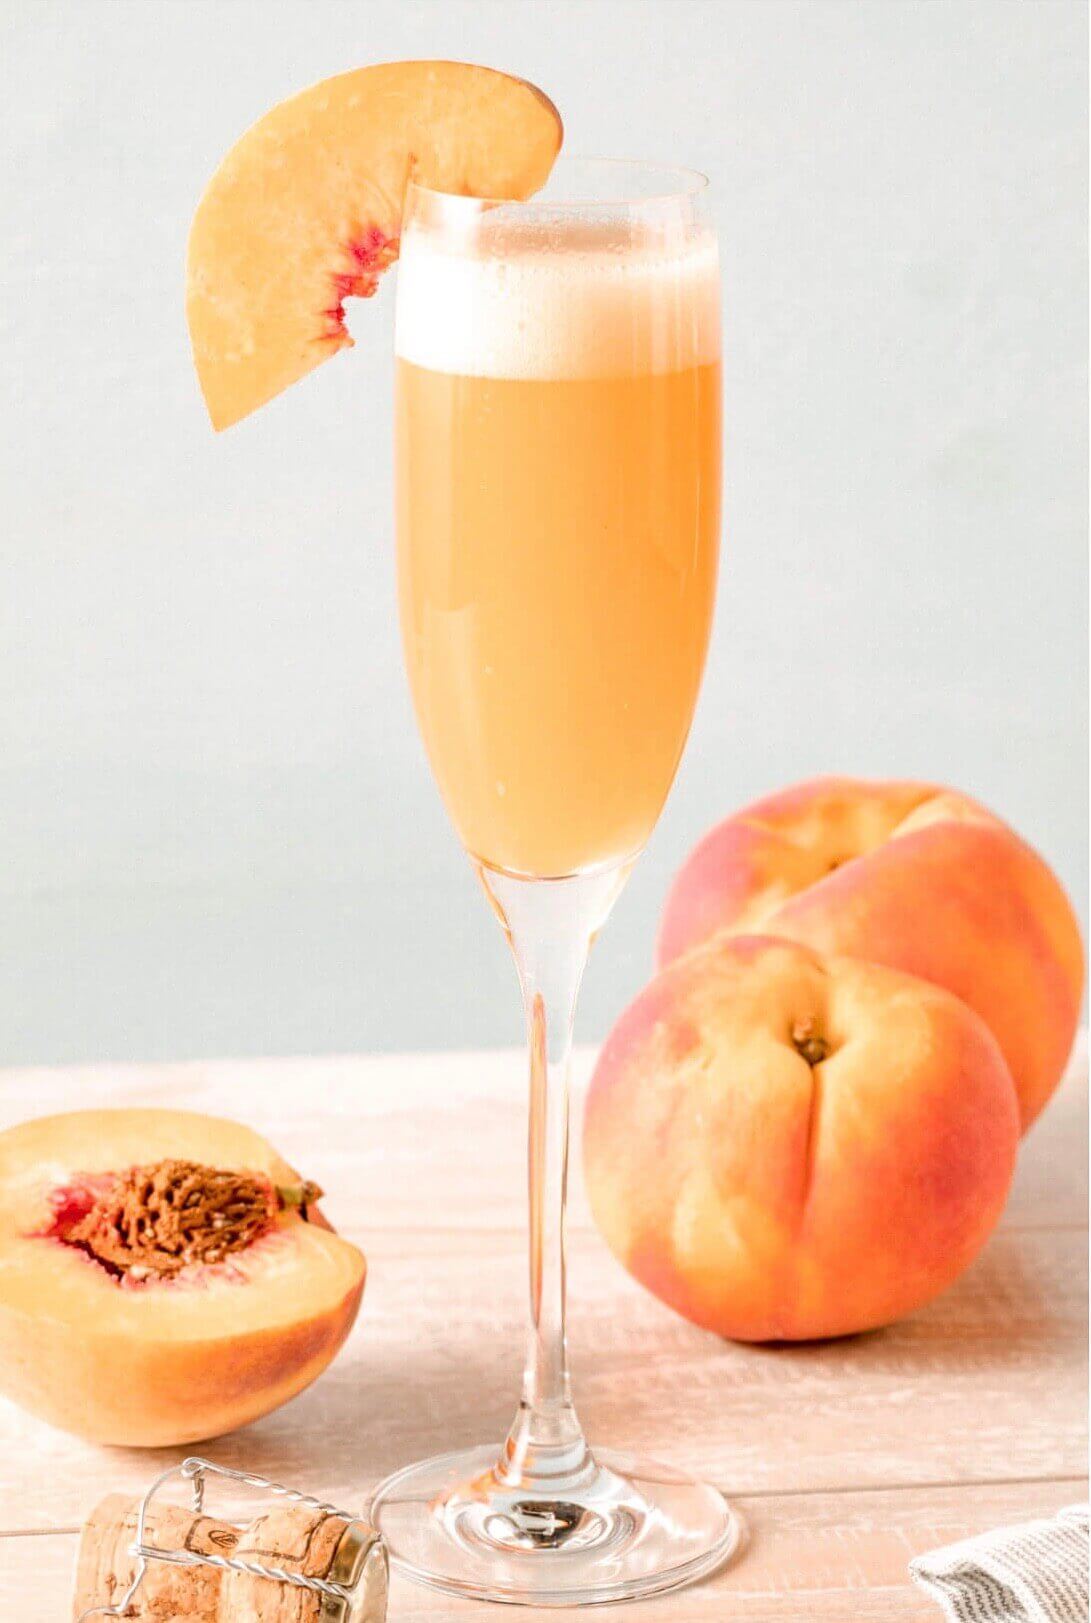 A Simple & Delicious Bellini Brunch-Your Guests Will Be Begging for Seconds